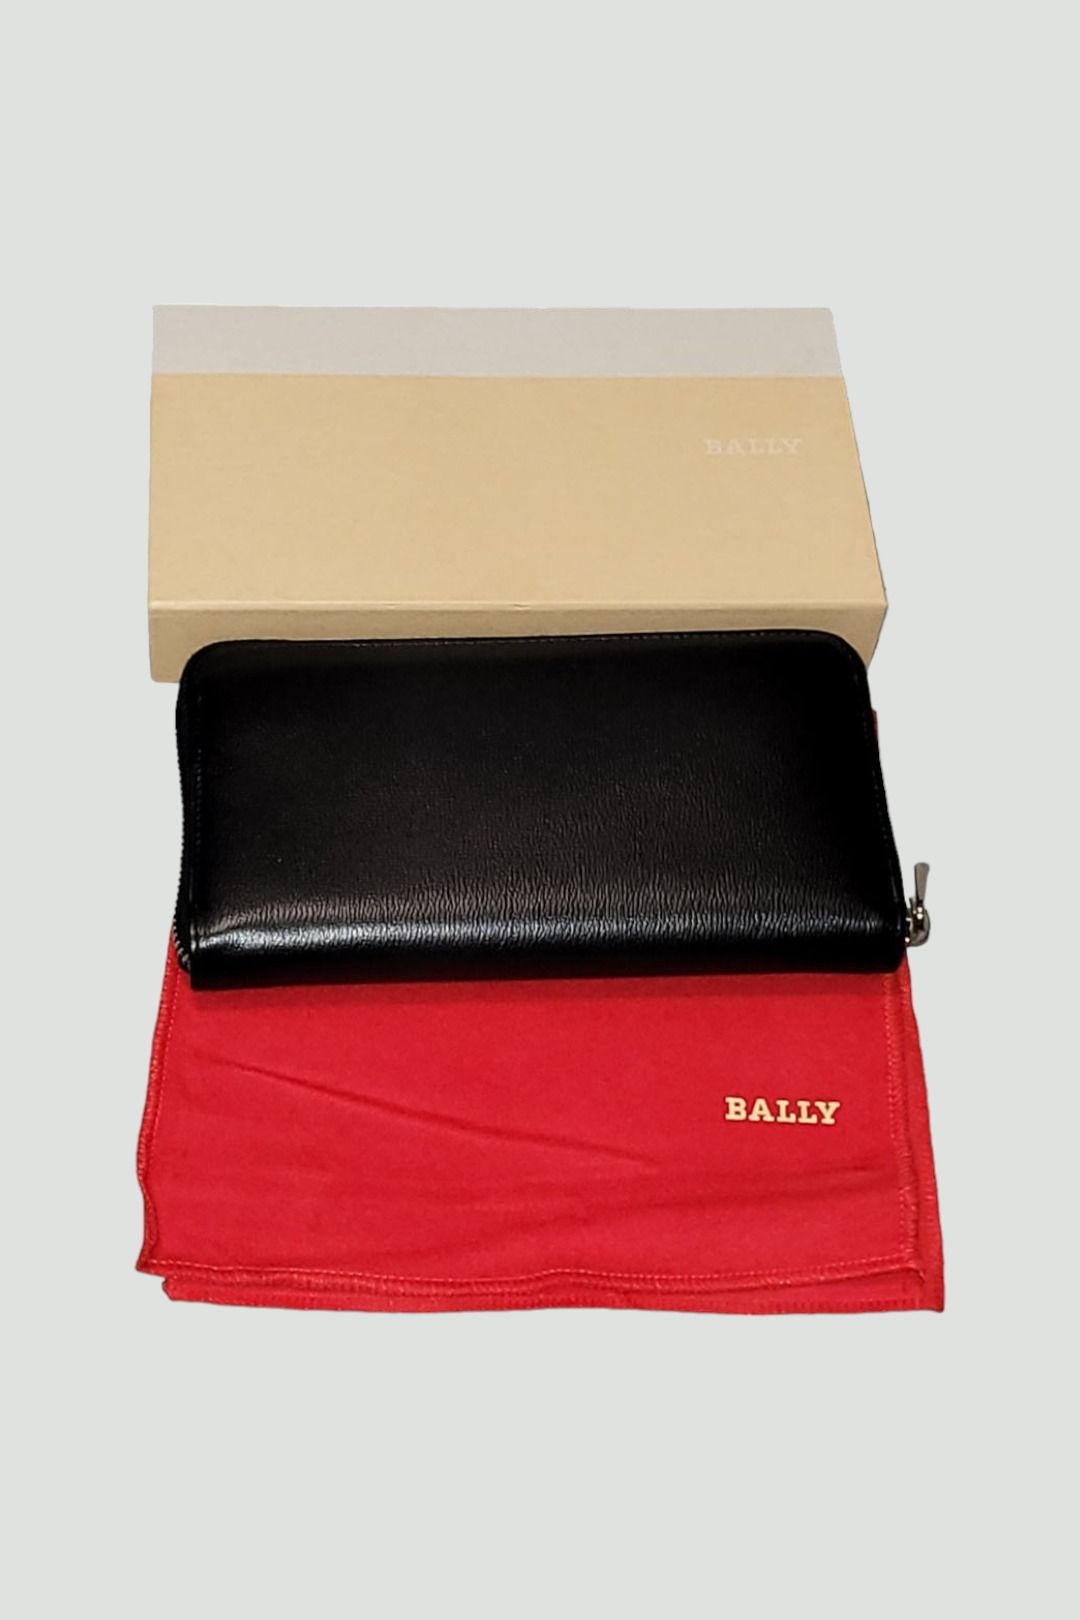 Bally - Black Grained Leather Zip Up Wallet